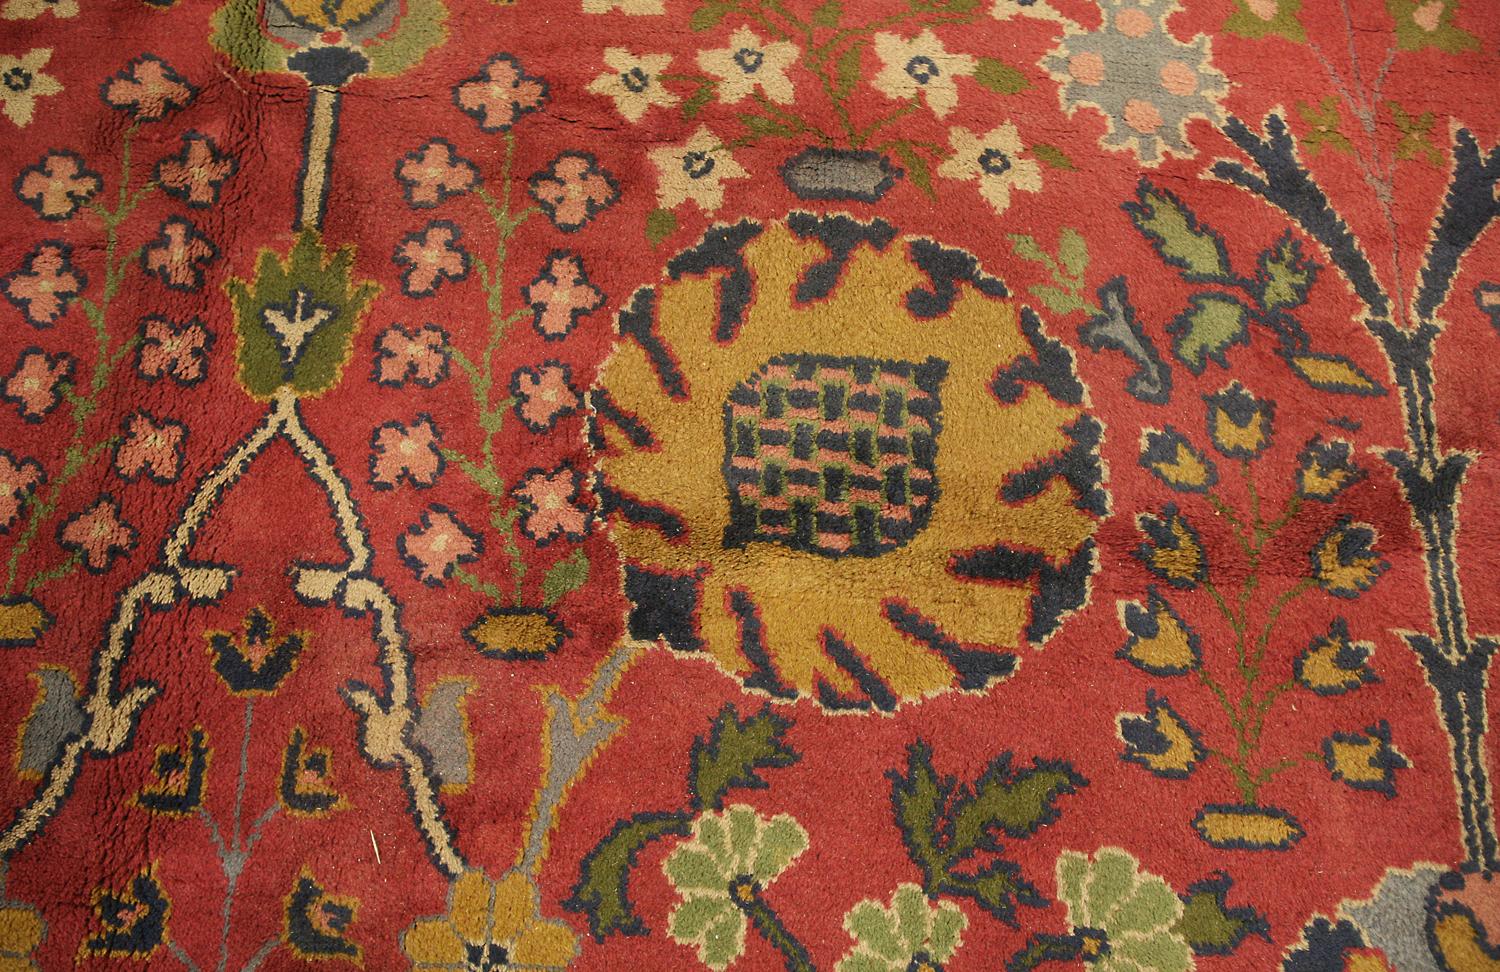 Circa 1920 Oversized Antique English Wool Donegal Carpet, Red Field For Sale 2